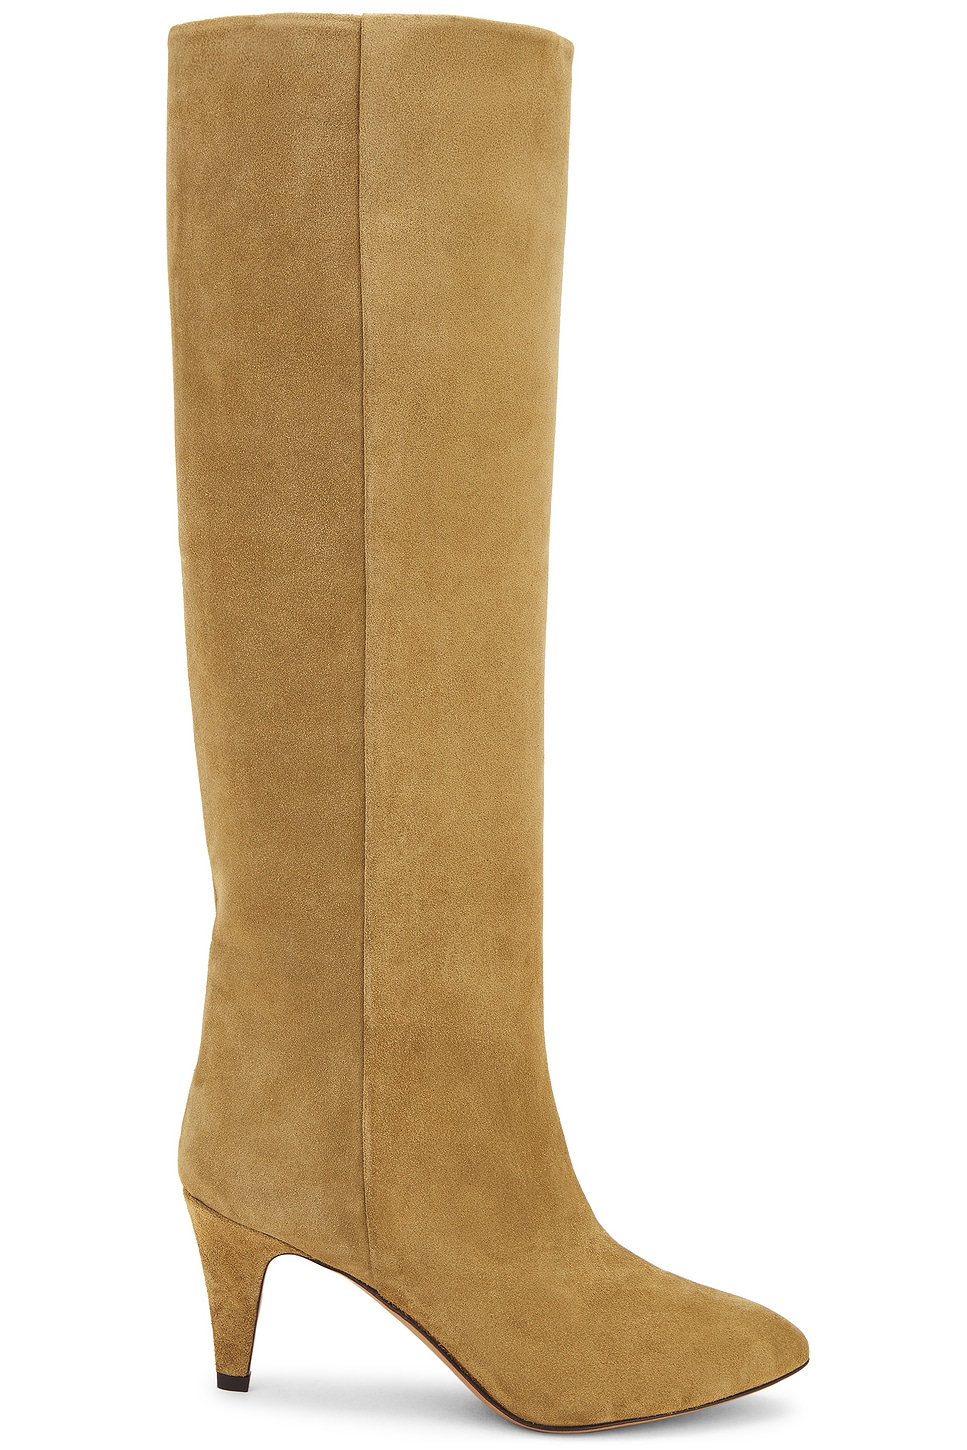 Image 1 of Isabel Marant Laspi Suede Boot in Taupe